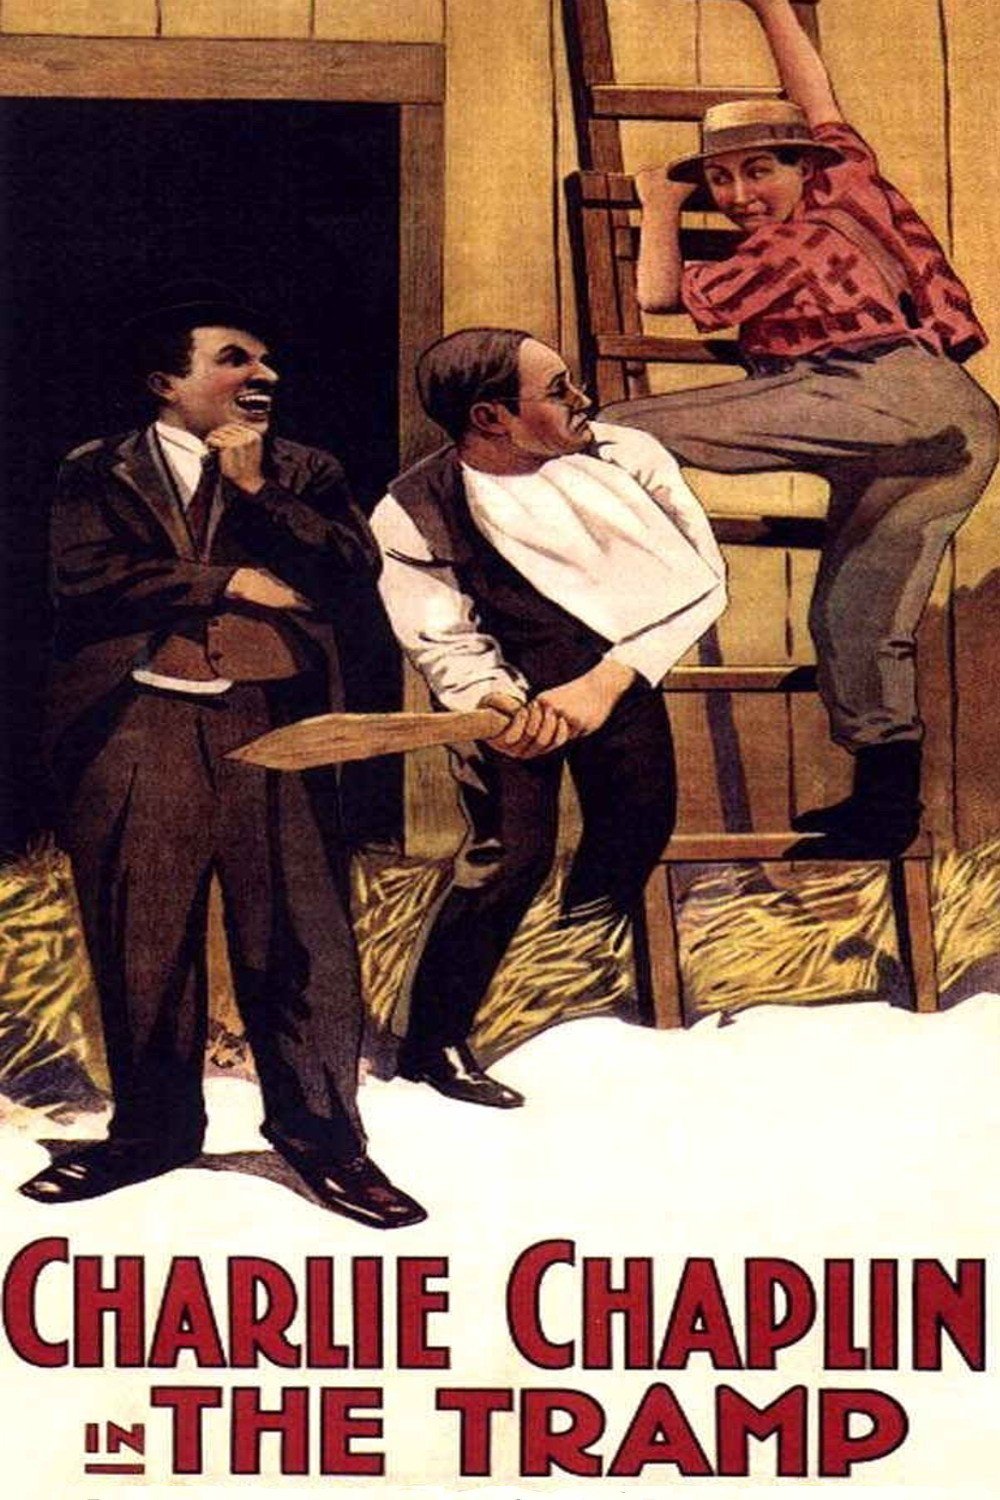 Poster for the movie "The Tramp"